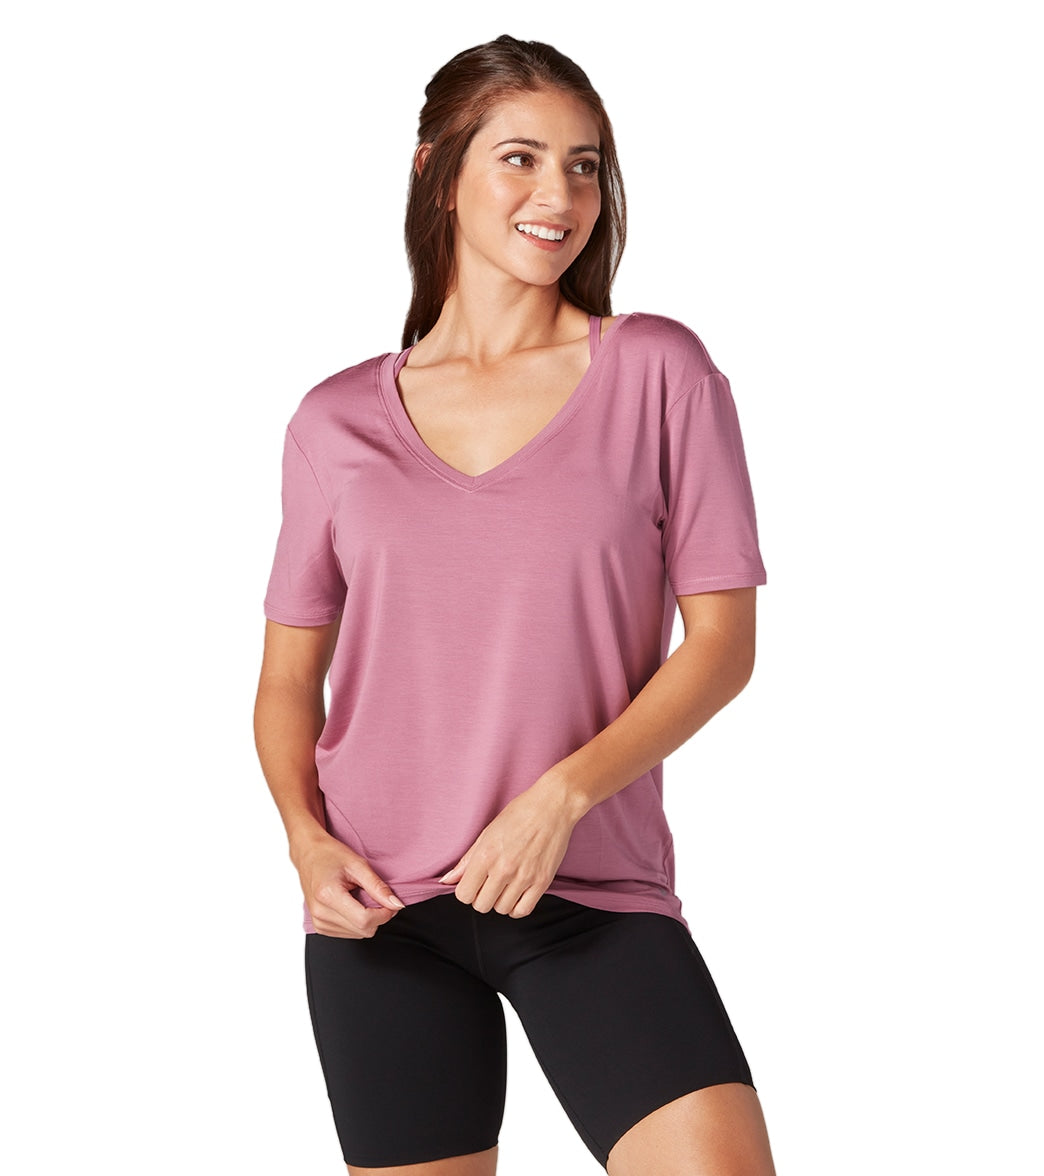 Apana NEW Women's Activewear Top Yoga Pink Short Sleeve V-neck Size S. AW